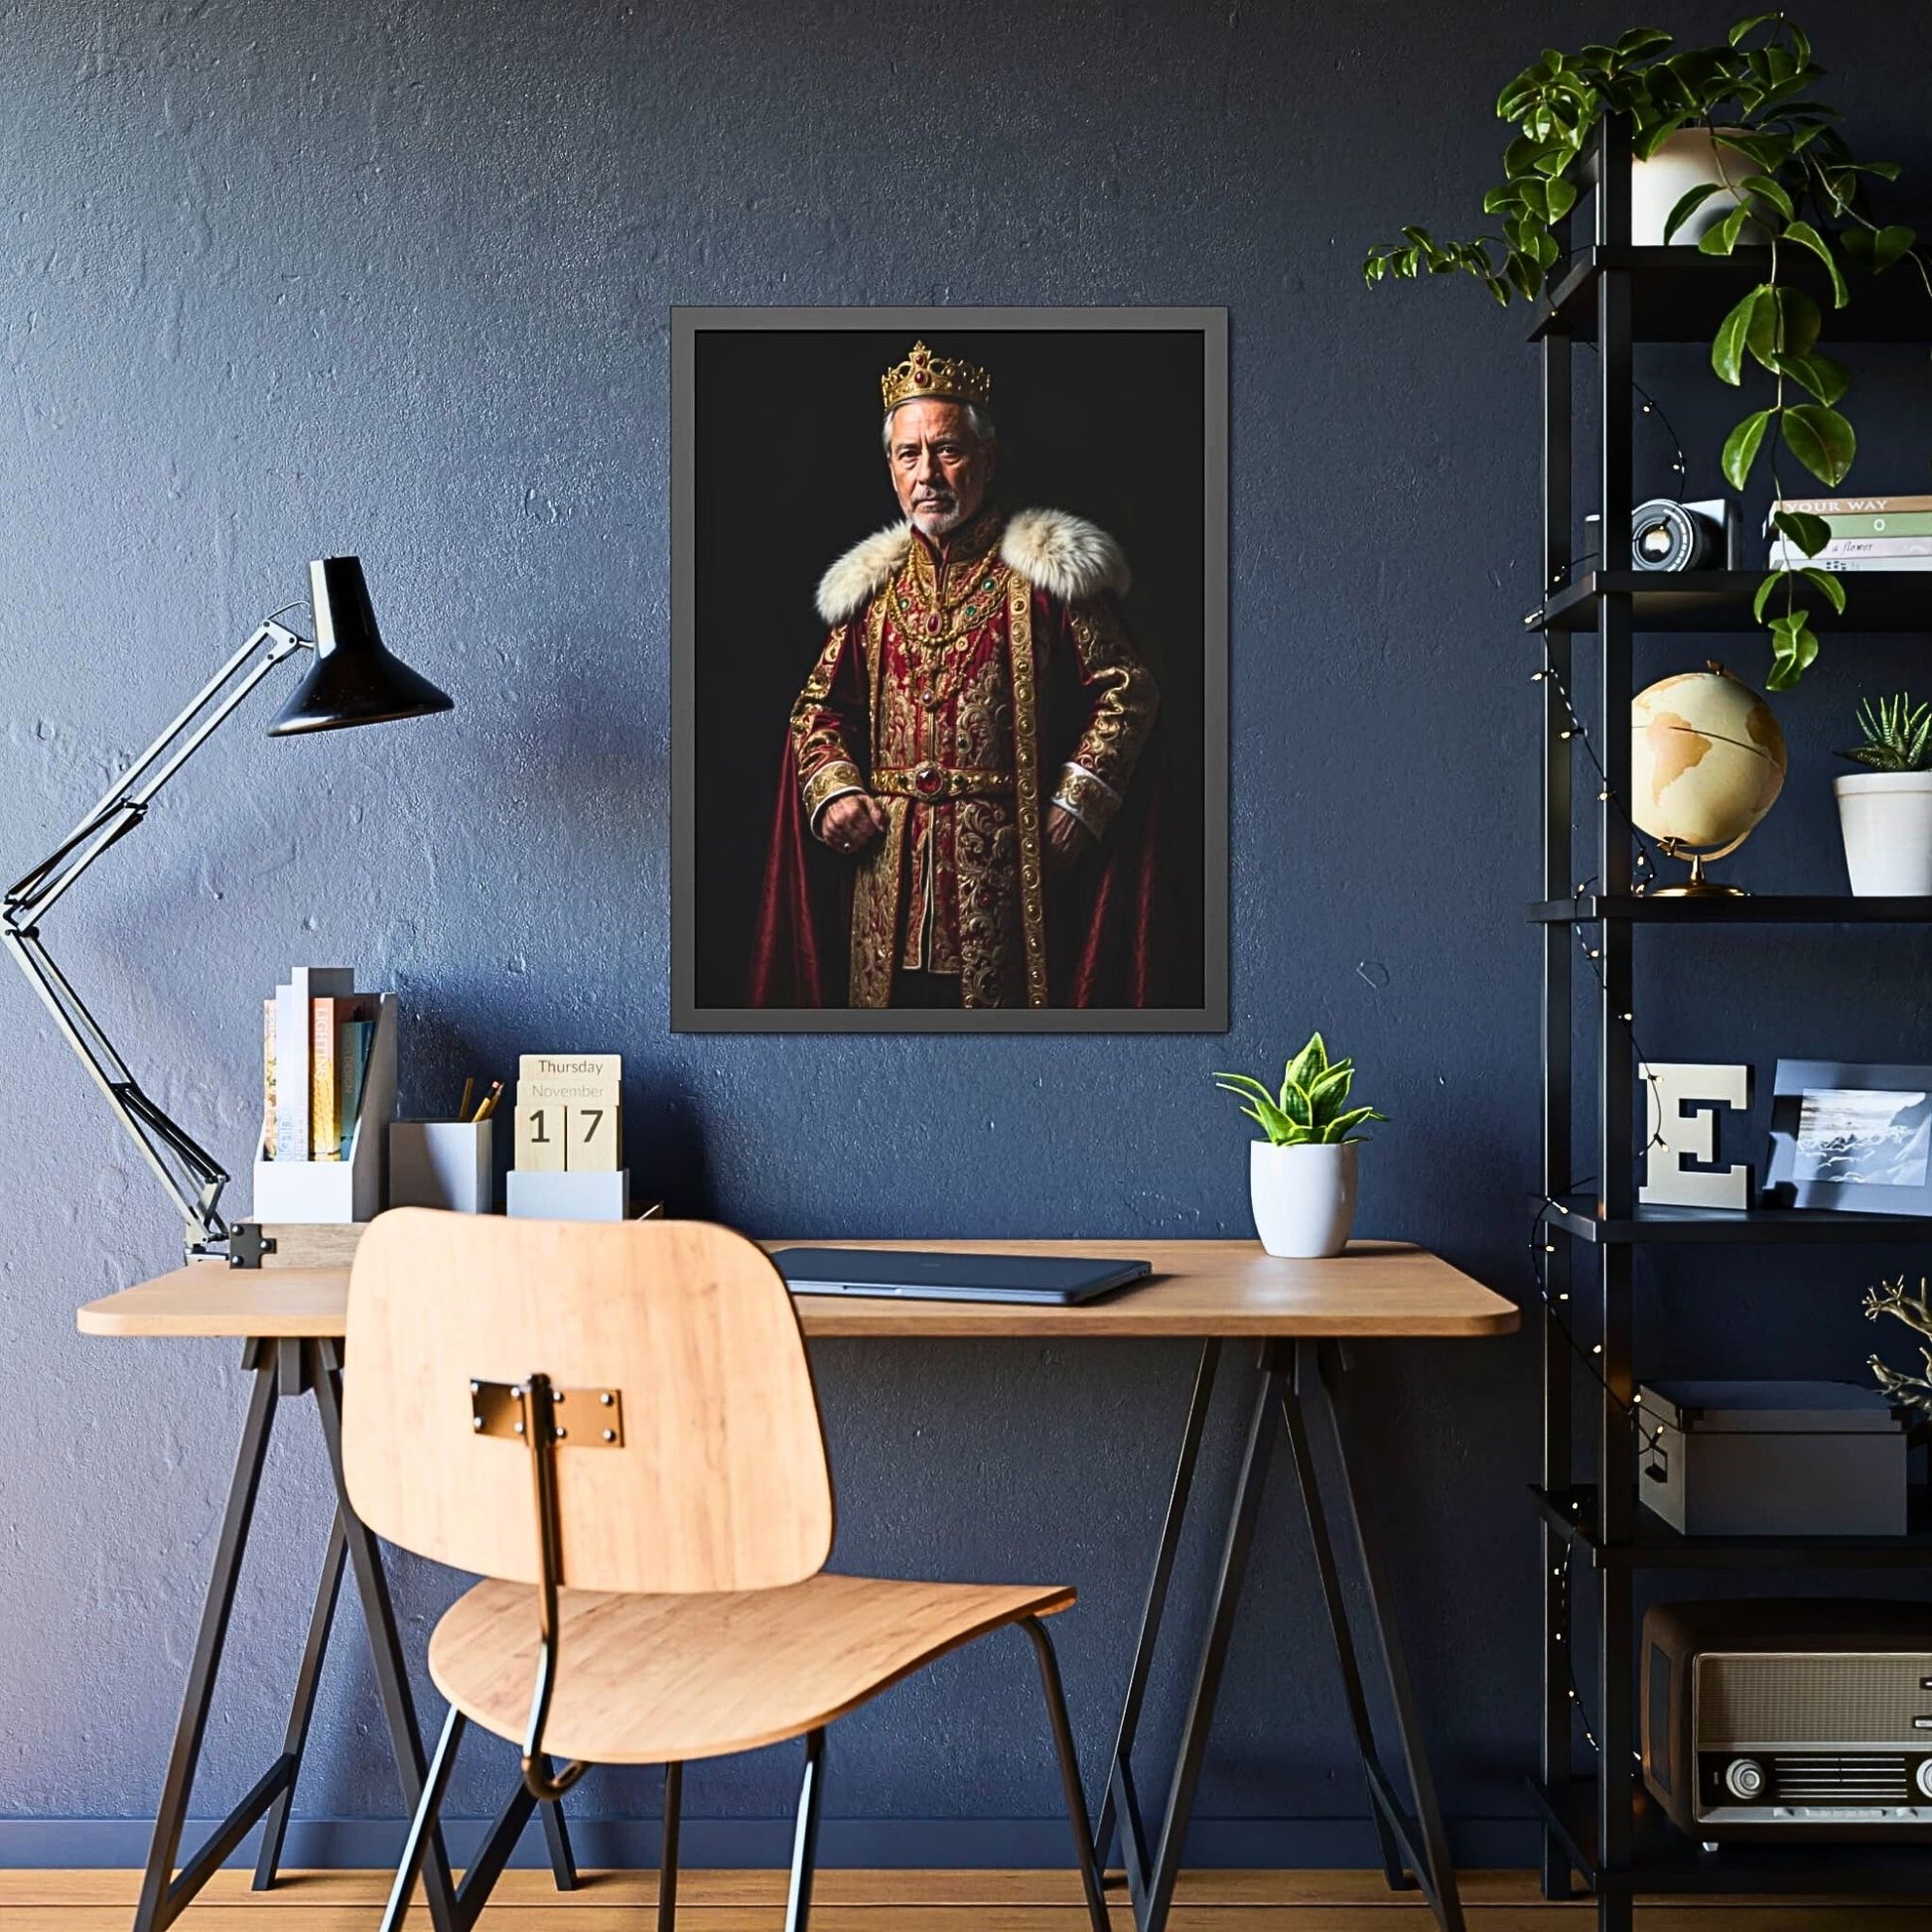 Celebrate a special occasion with a personalized king portrait, intricately designed in the style of the Renaissance. This custom royal portrait, suitable for birthdays and more, makes a thoughtful gift for him. With its historical charm and digital download availability, it's a timeless expression of regal sophistication that he'll cherish forever.